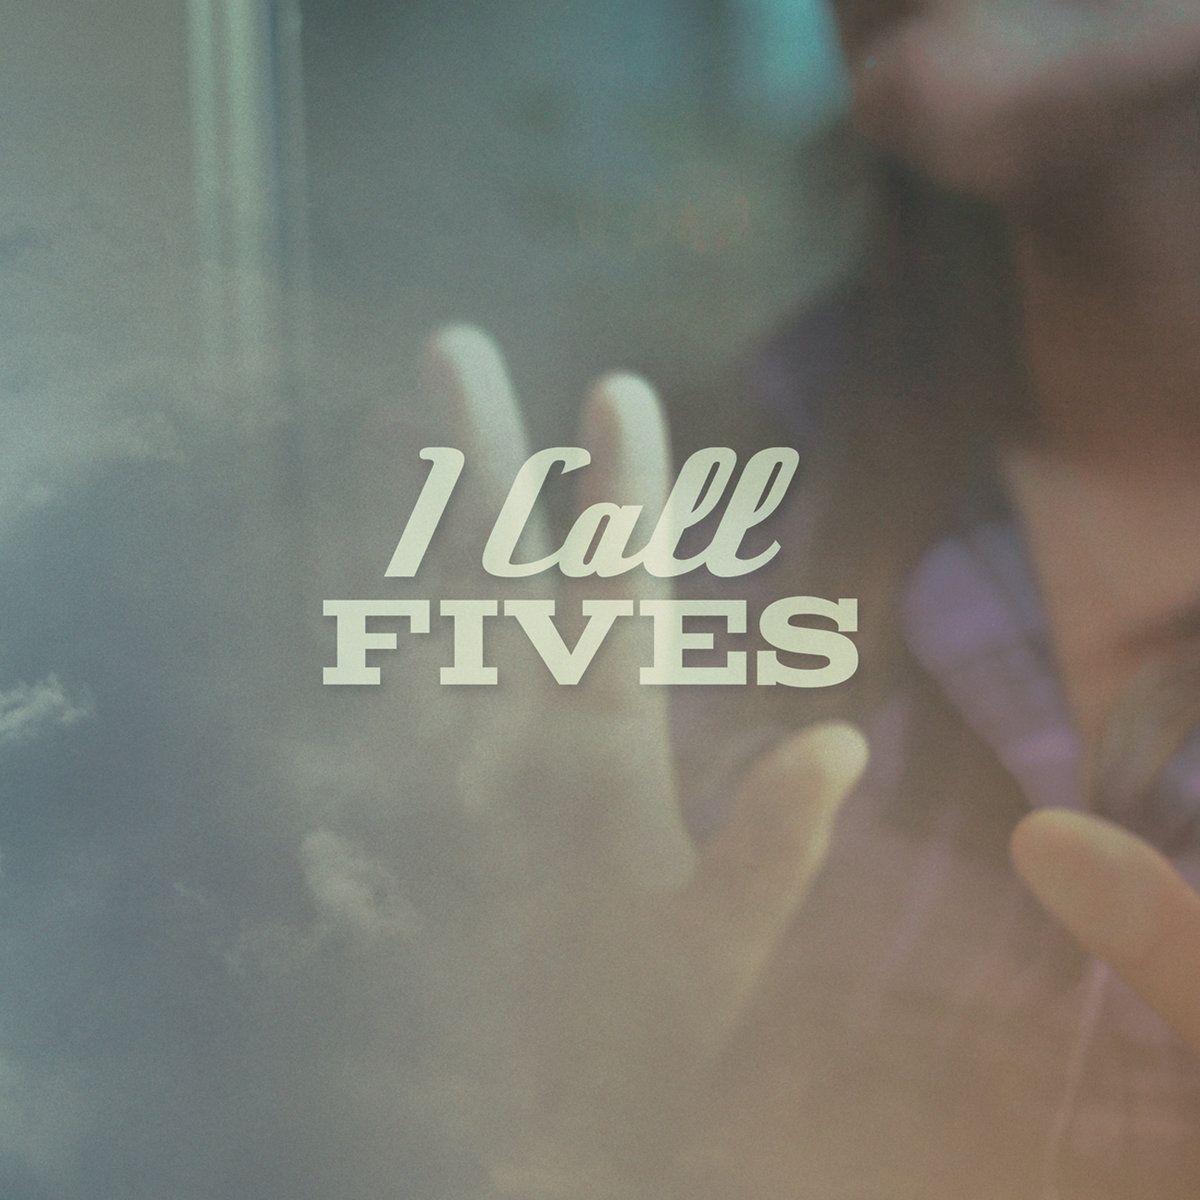 Five S Logo - I Call Fives | Pure Noise Records